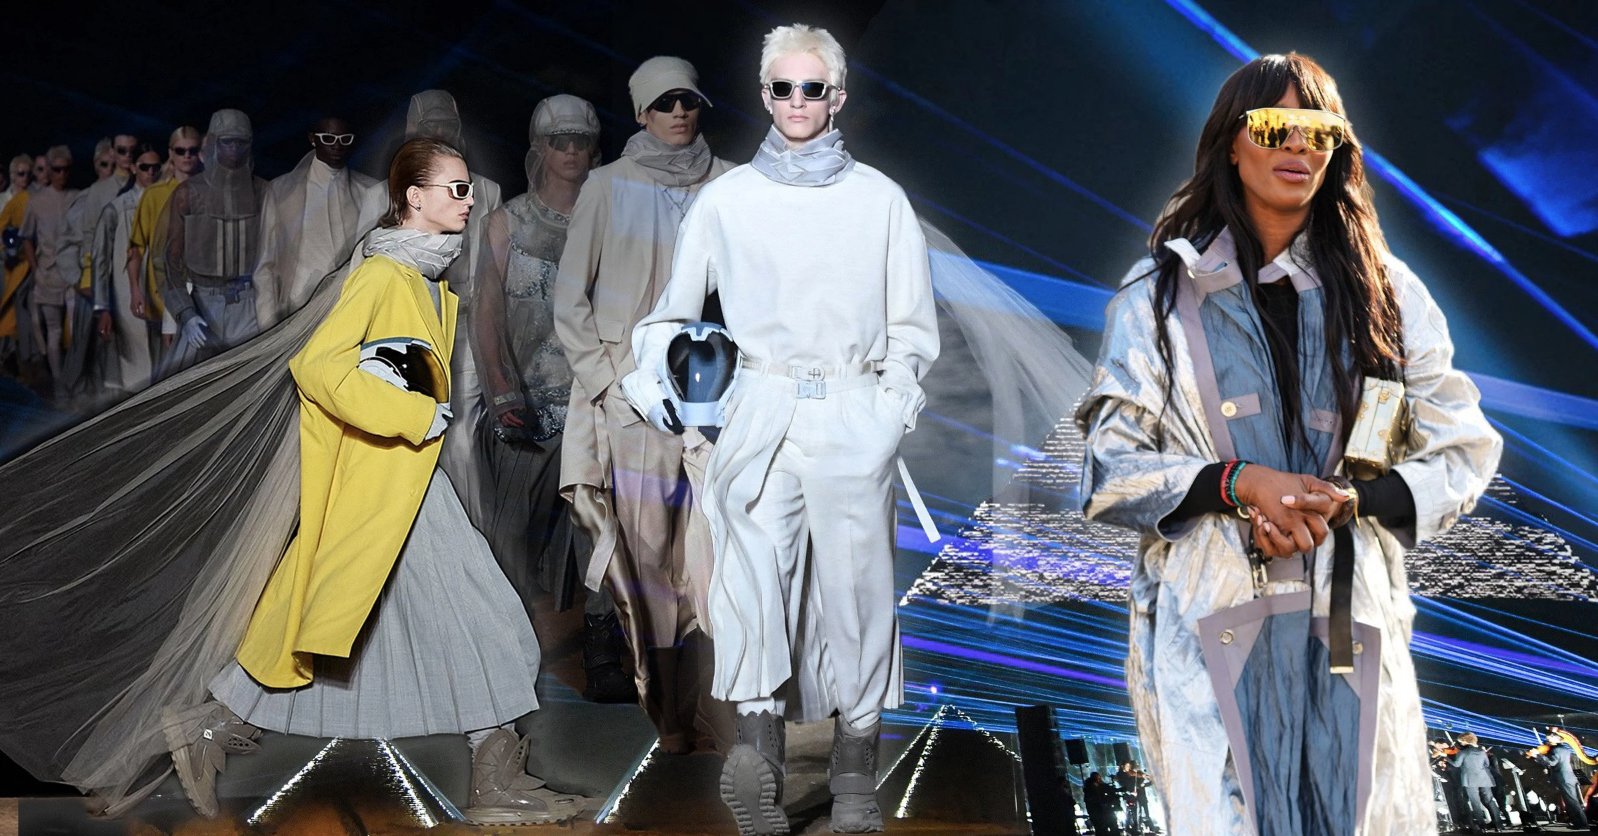 The future of fashion: Experts predict sci-fi looks will be big in 2023